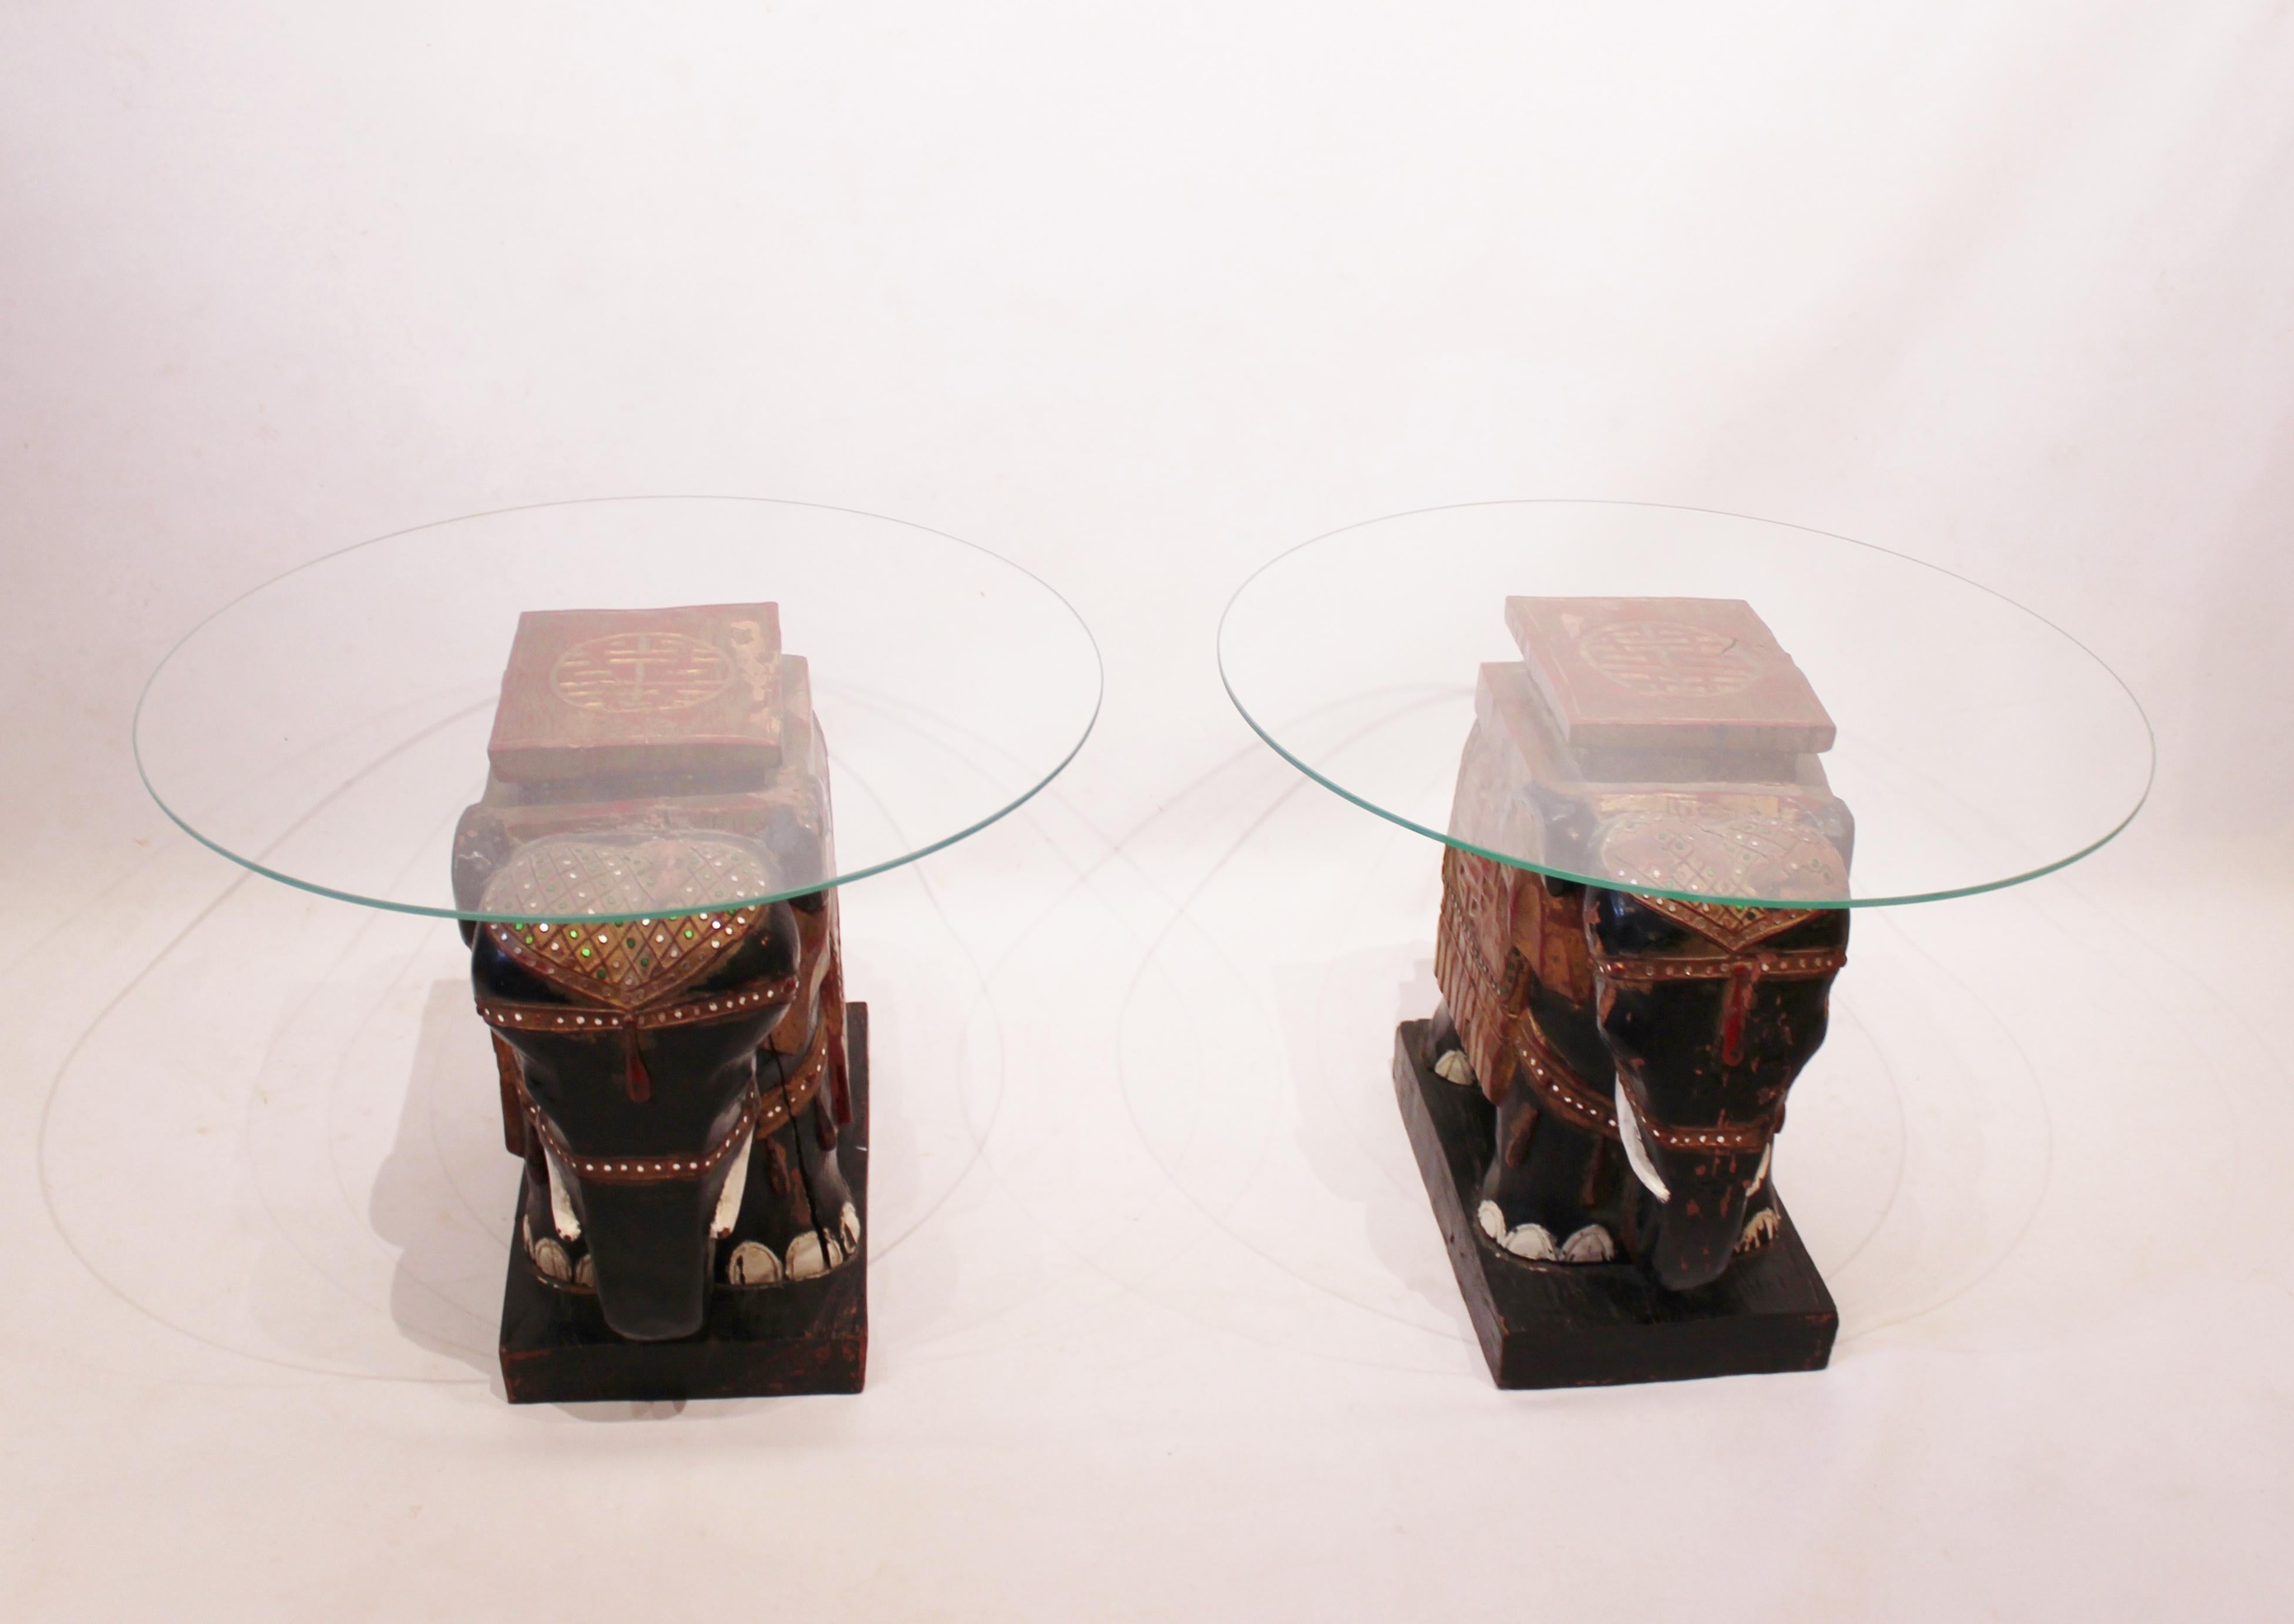 A pair of side tables with glass plates and Chinese elephant bases made of original painted wood and patina from the circa 1880s is a truly unique and captivating find.

The combination of the glass plates and the Chinese elephant bases creates an